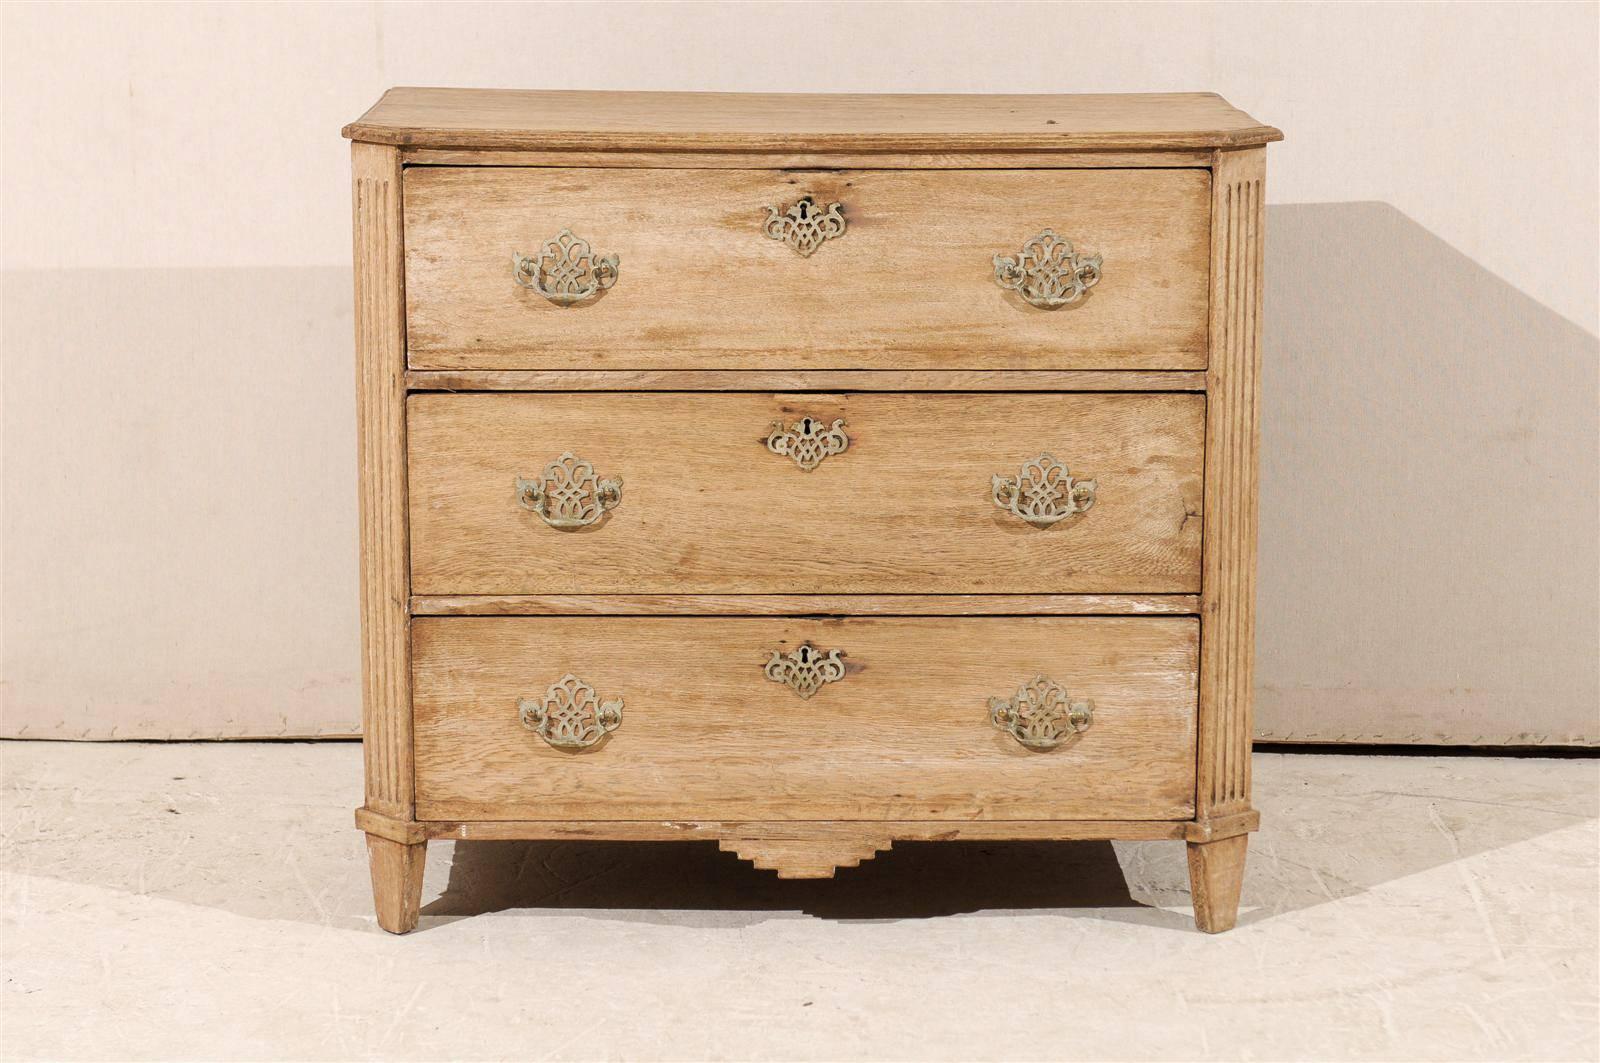 A 19th century English bleached three-drawer chest. This small size bleached English chest features three drawers with bail handles. The chest has beveled and fluted side posts above short angled and tapered feet. The skirt is nicely carved. With